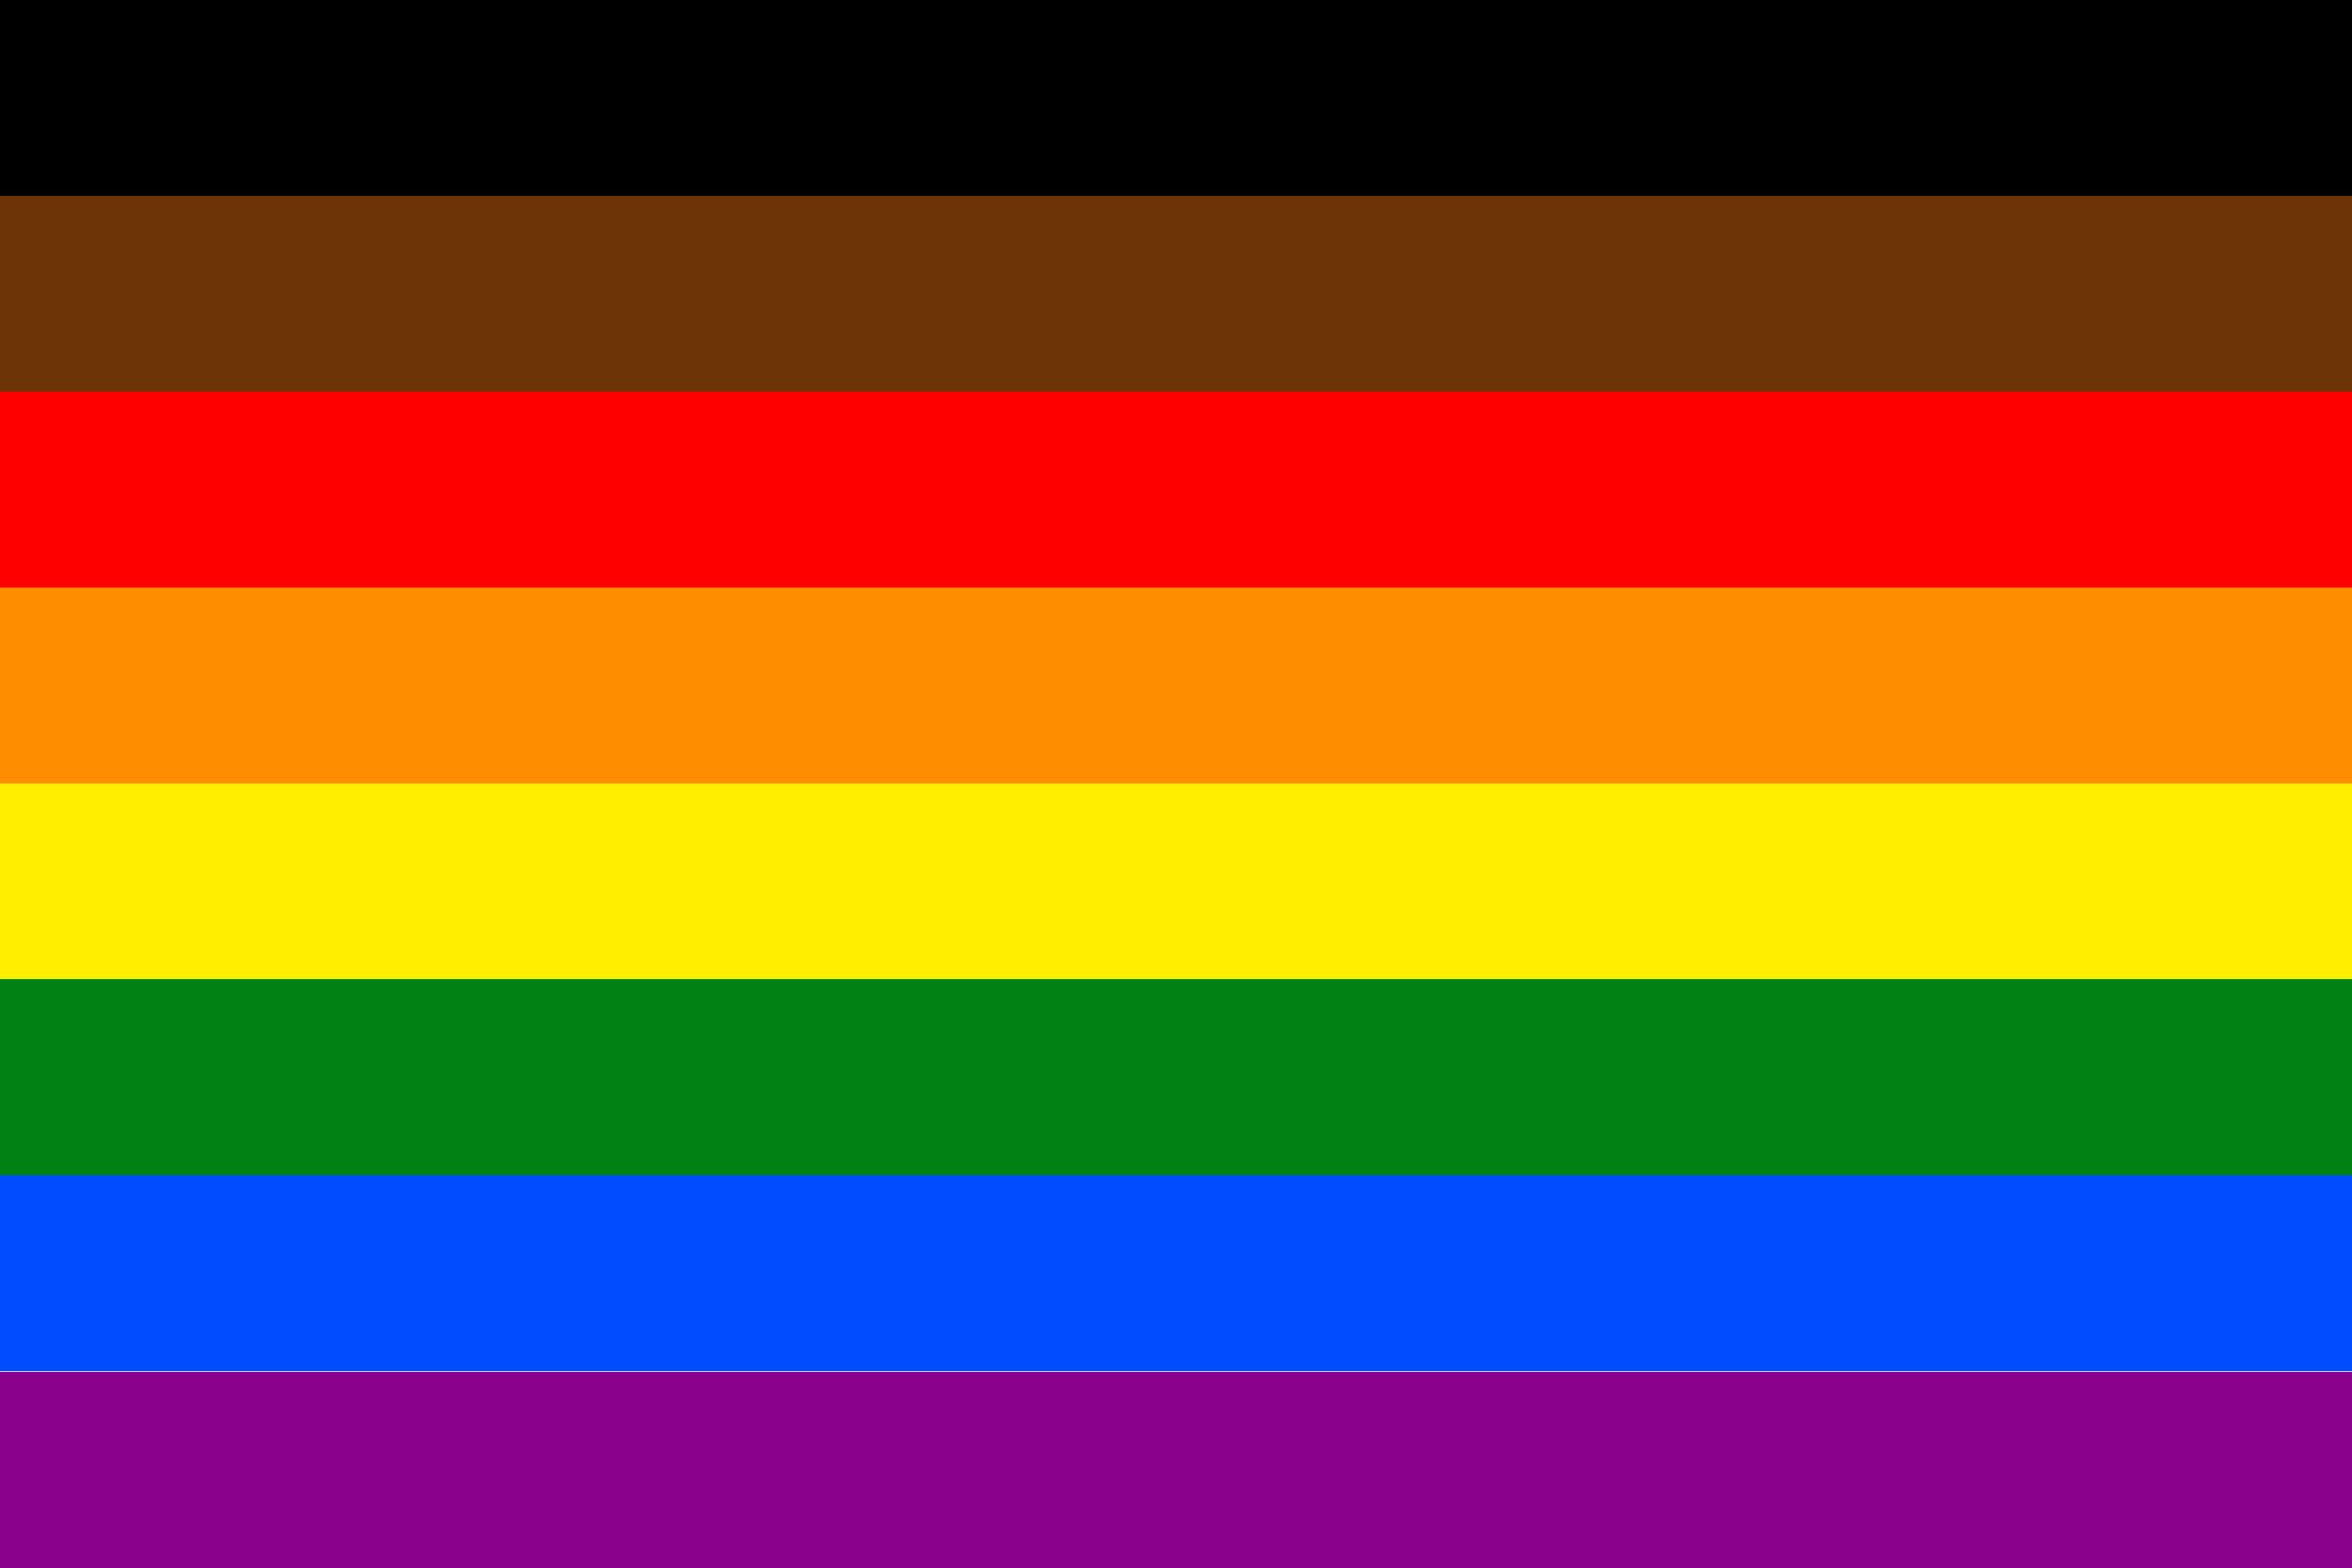 How Many Pride Flags Do You Know? (Very Long) - Test